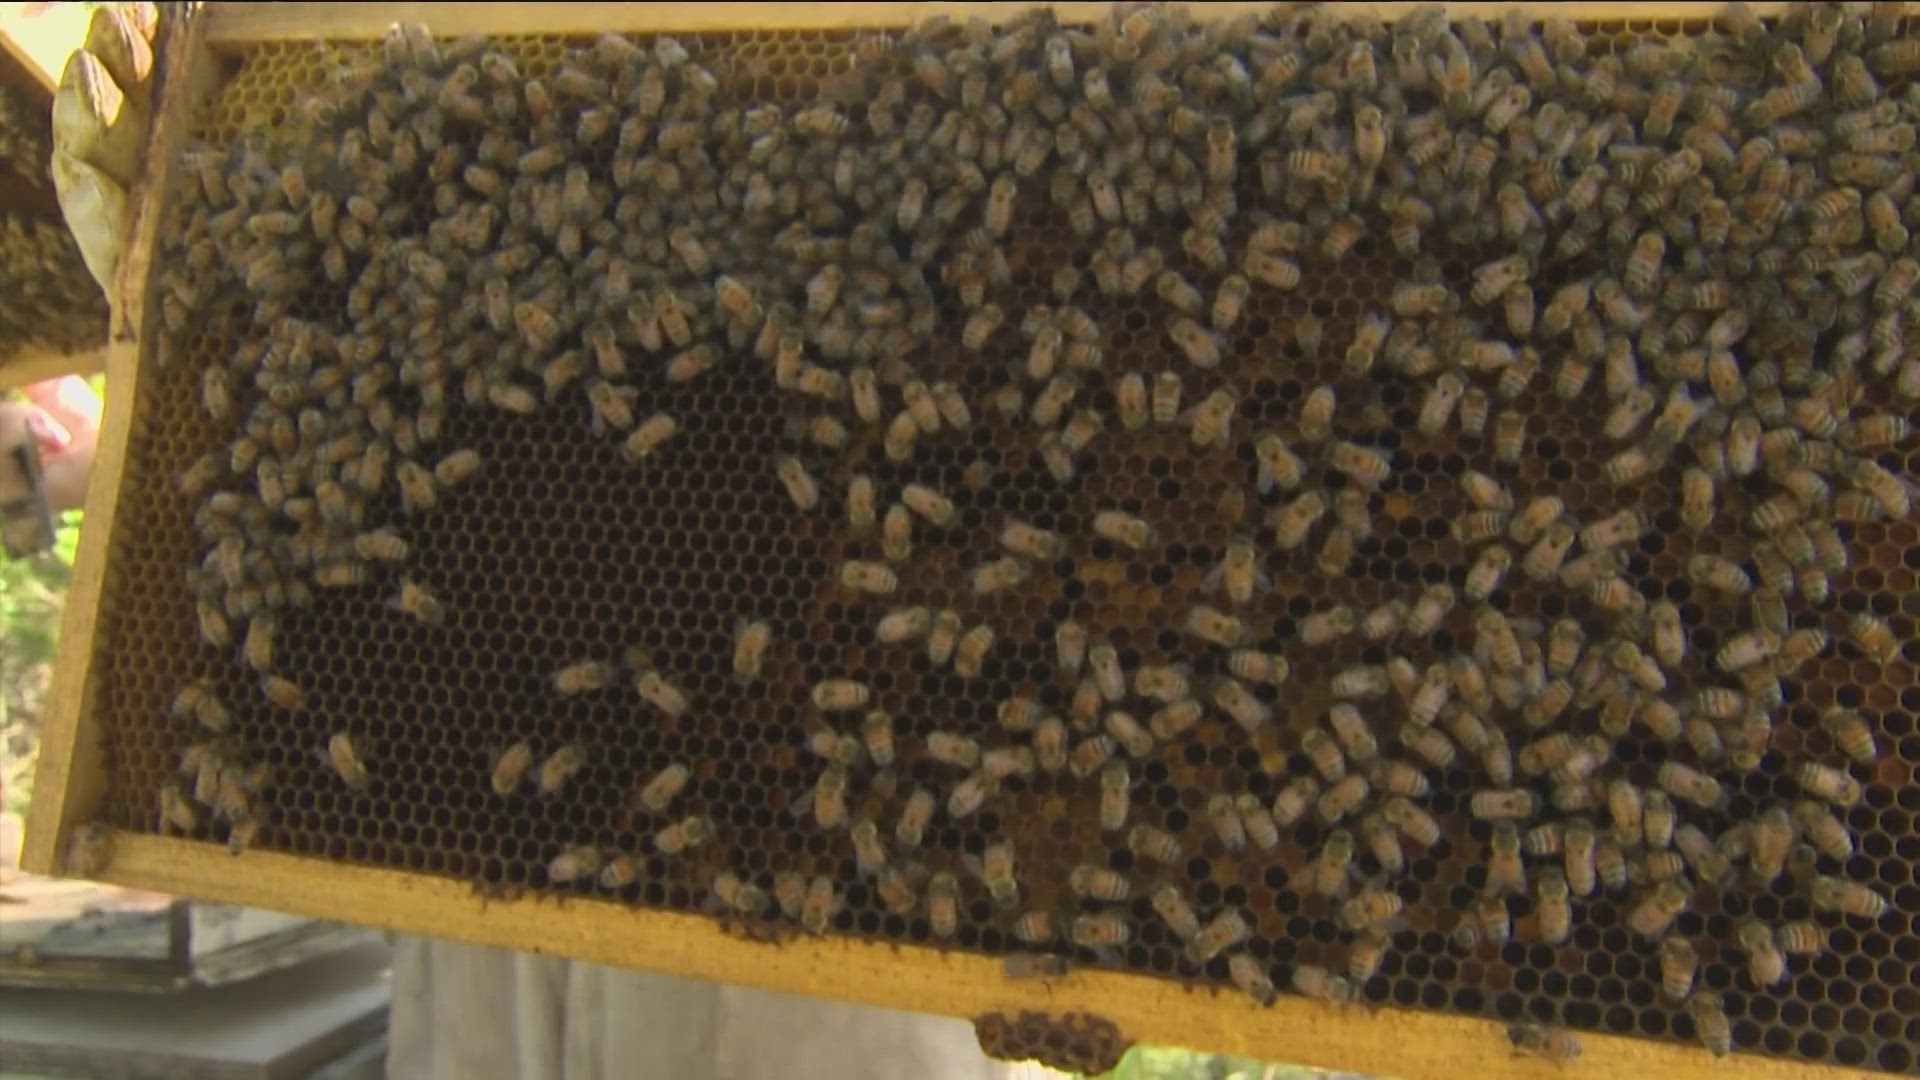 While some see bees as a nuisance, the Texas Honey Bee Farm is educating Central Texans on just how crucial the little pollinators are to our ecosystem.